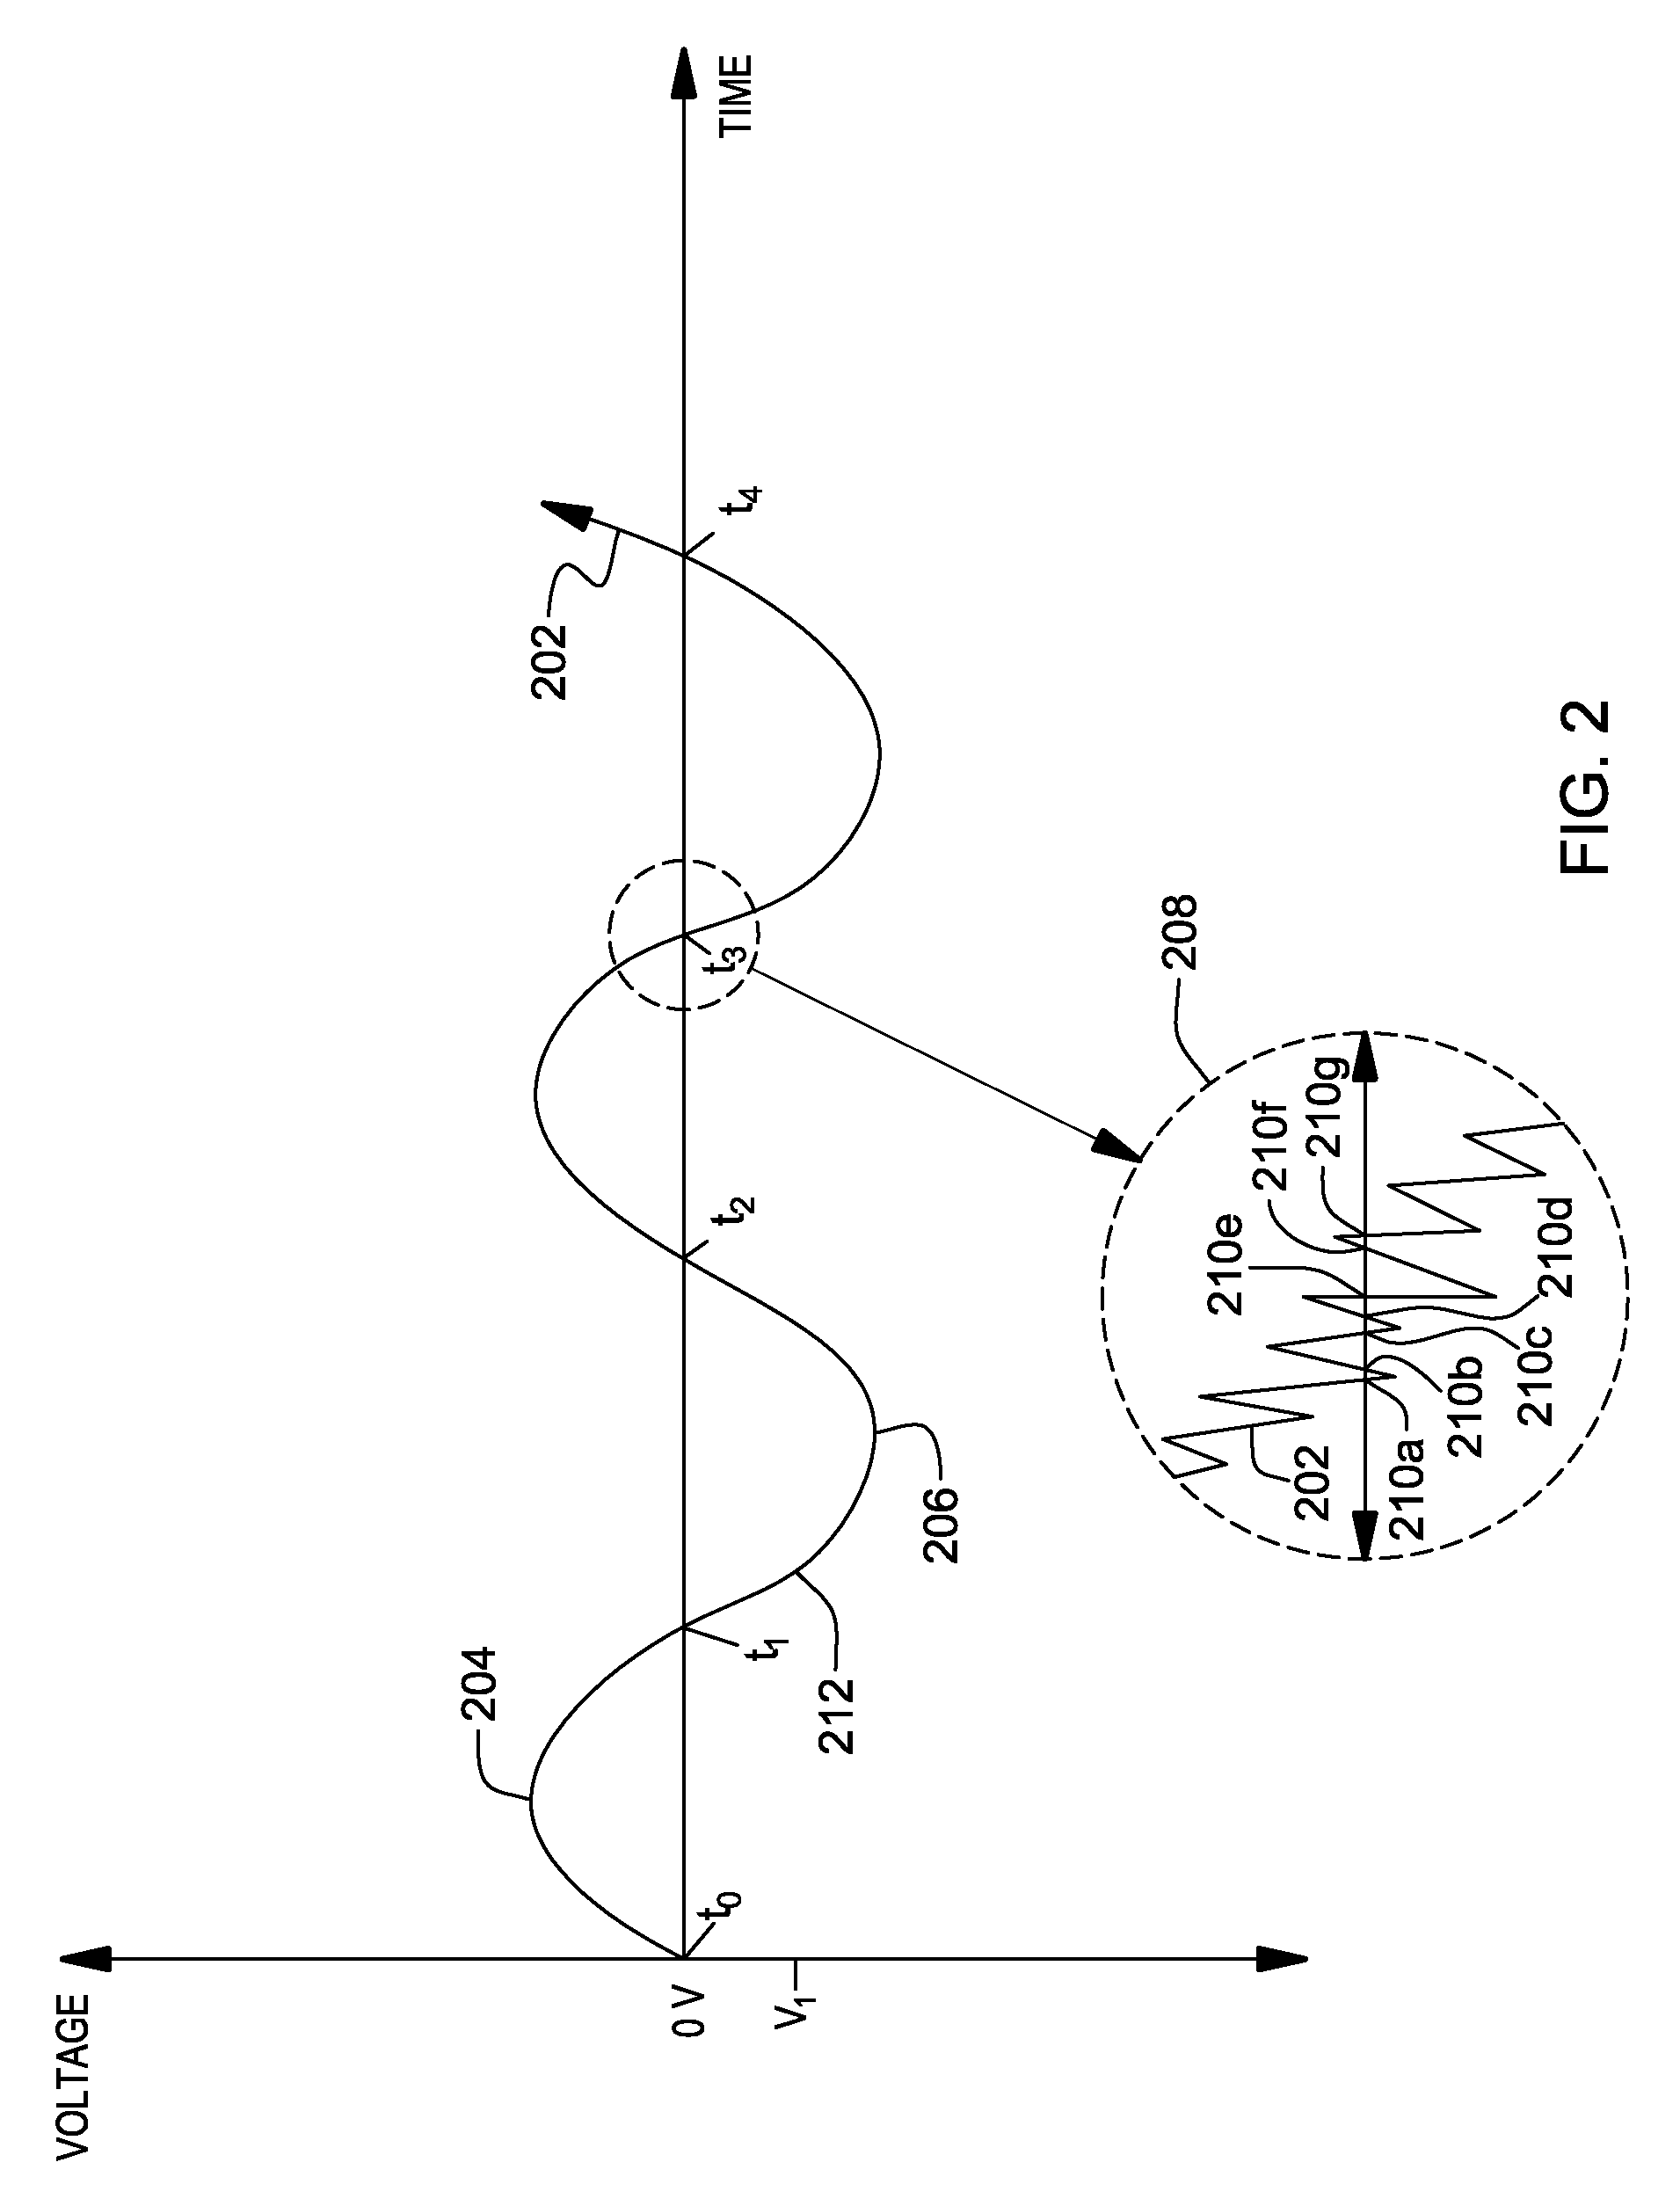 Threshold-based zero-crossing detection in an electrical dimmer